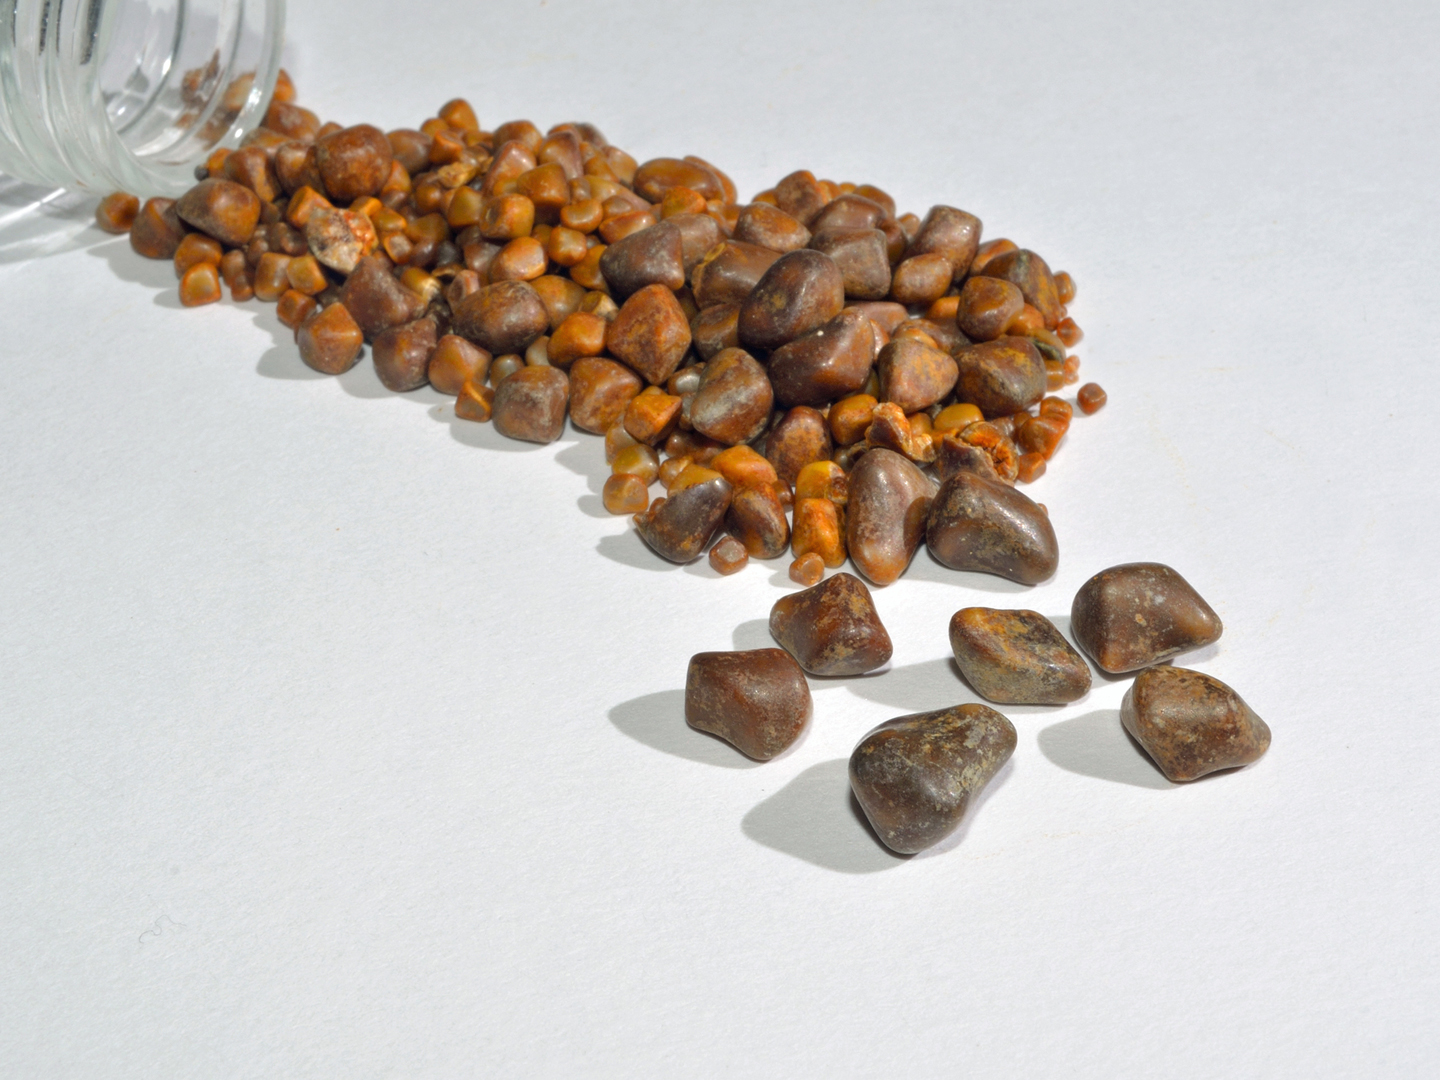 Gallstones and specimen jar from single operation